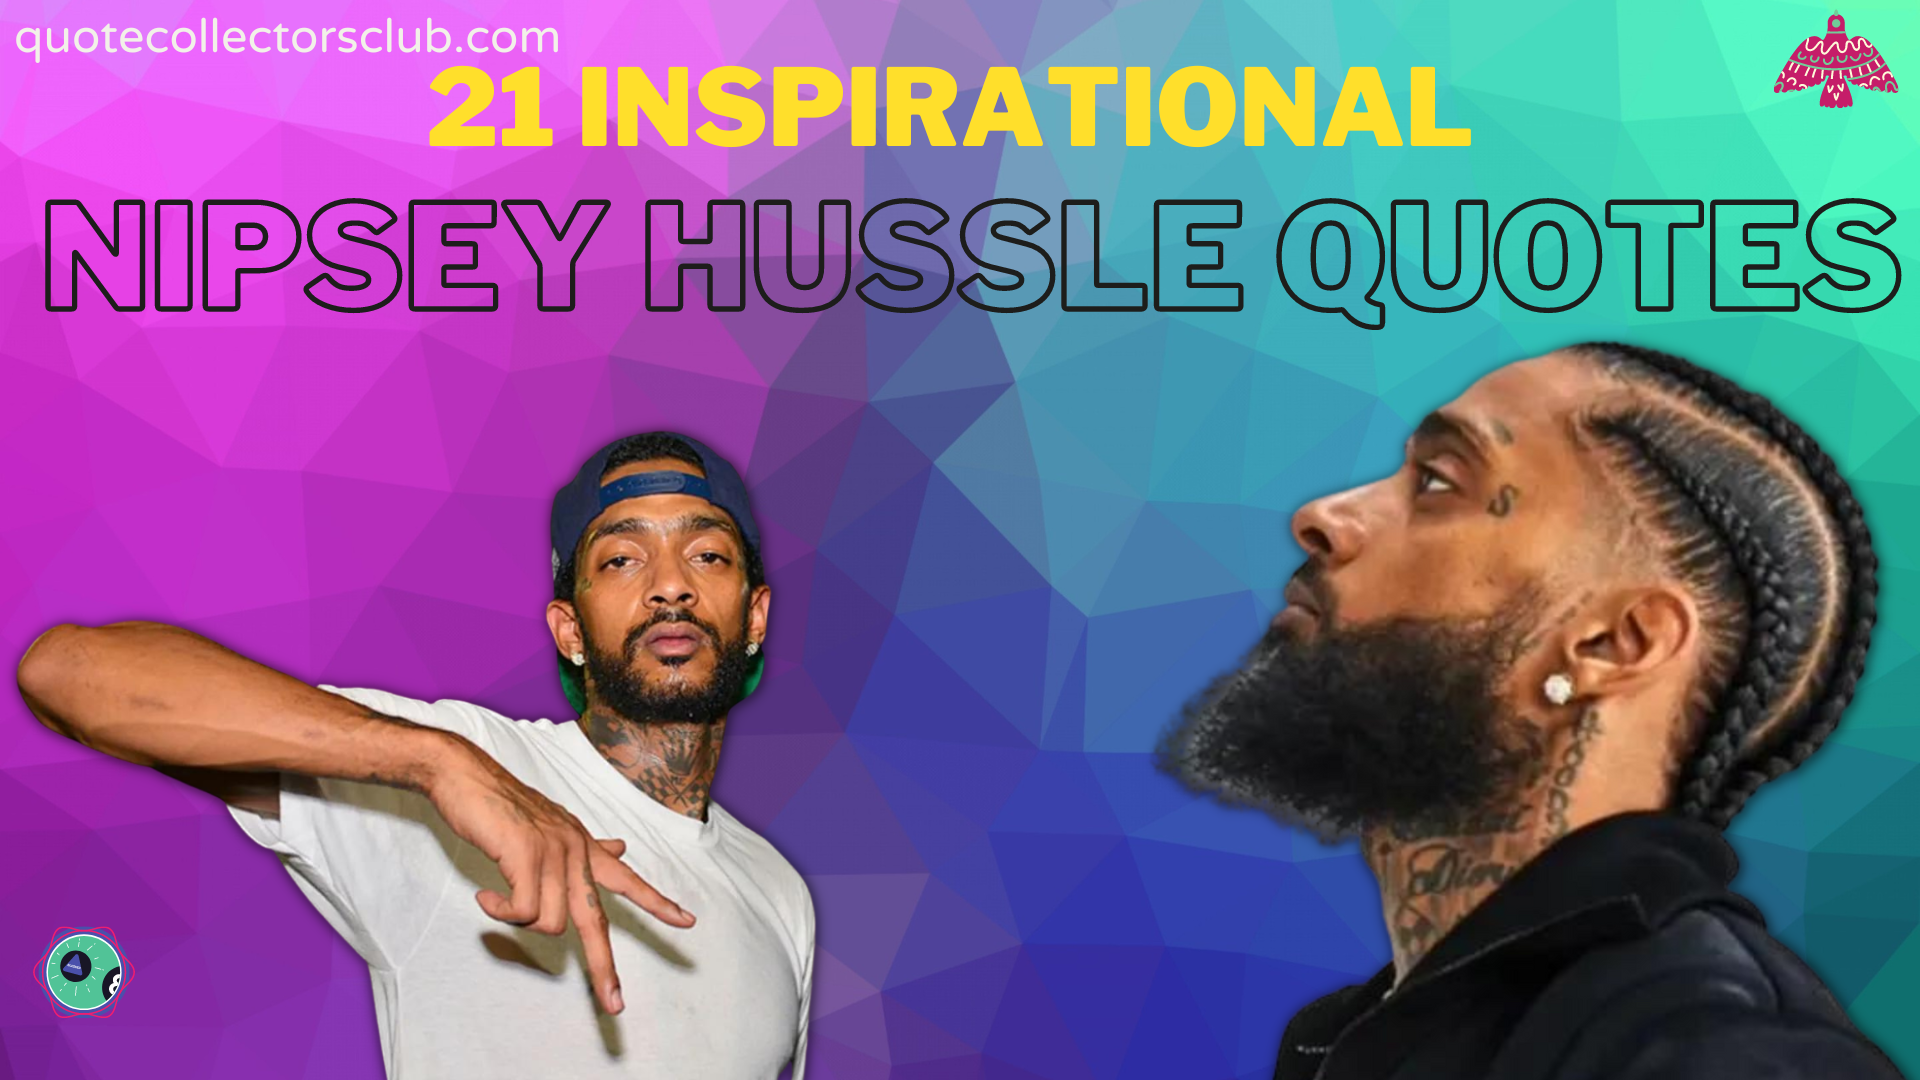 21 Inspirational Nipsey Hussle Quotes Quote Collectors Club